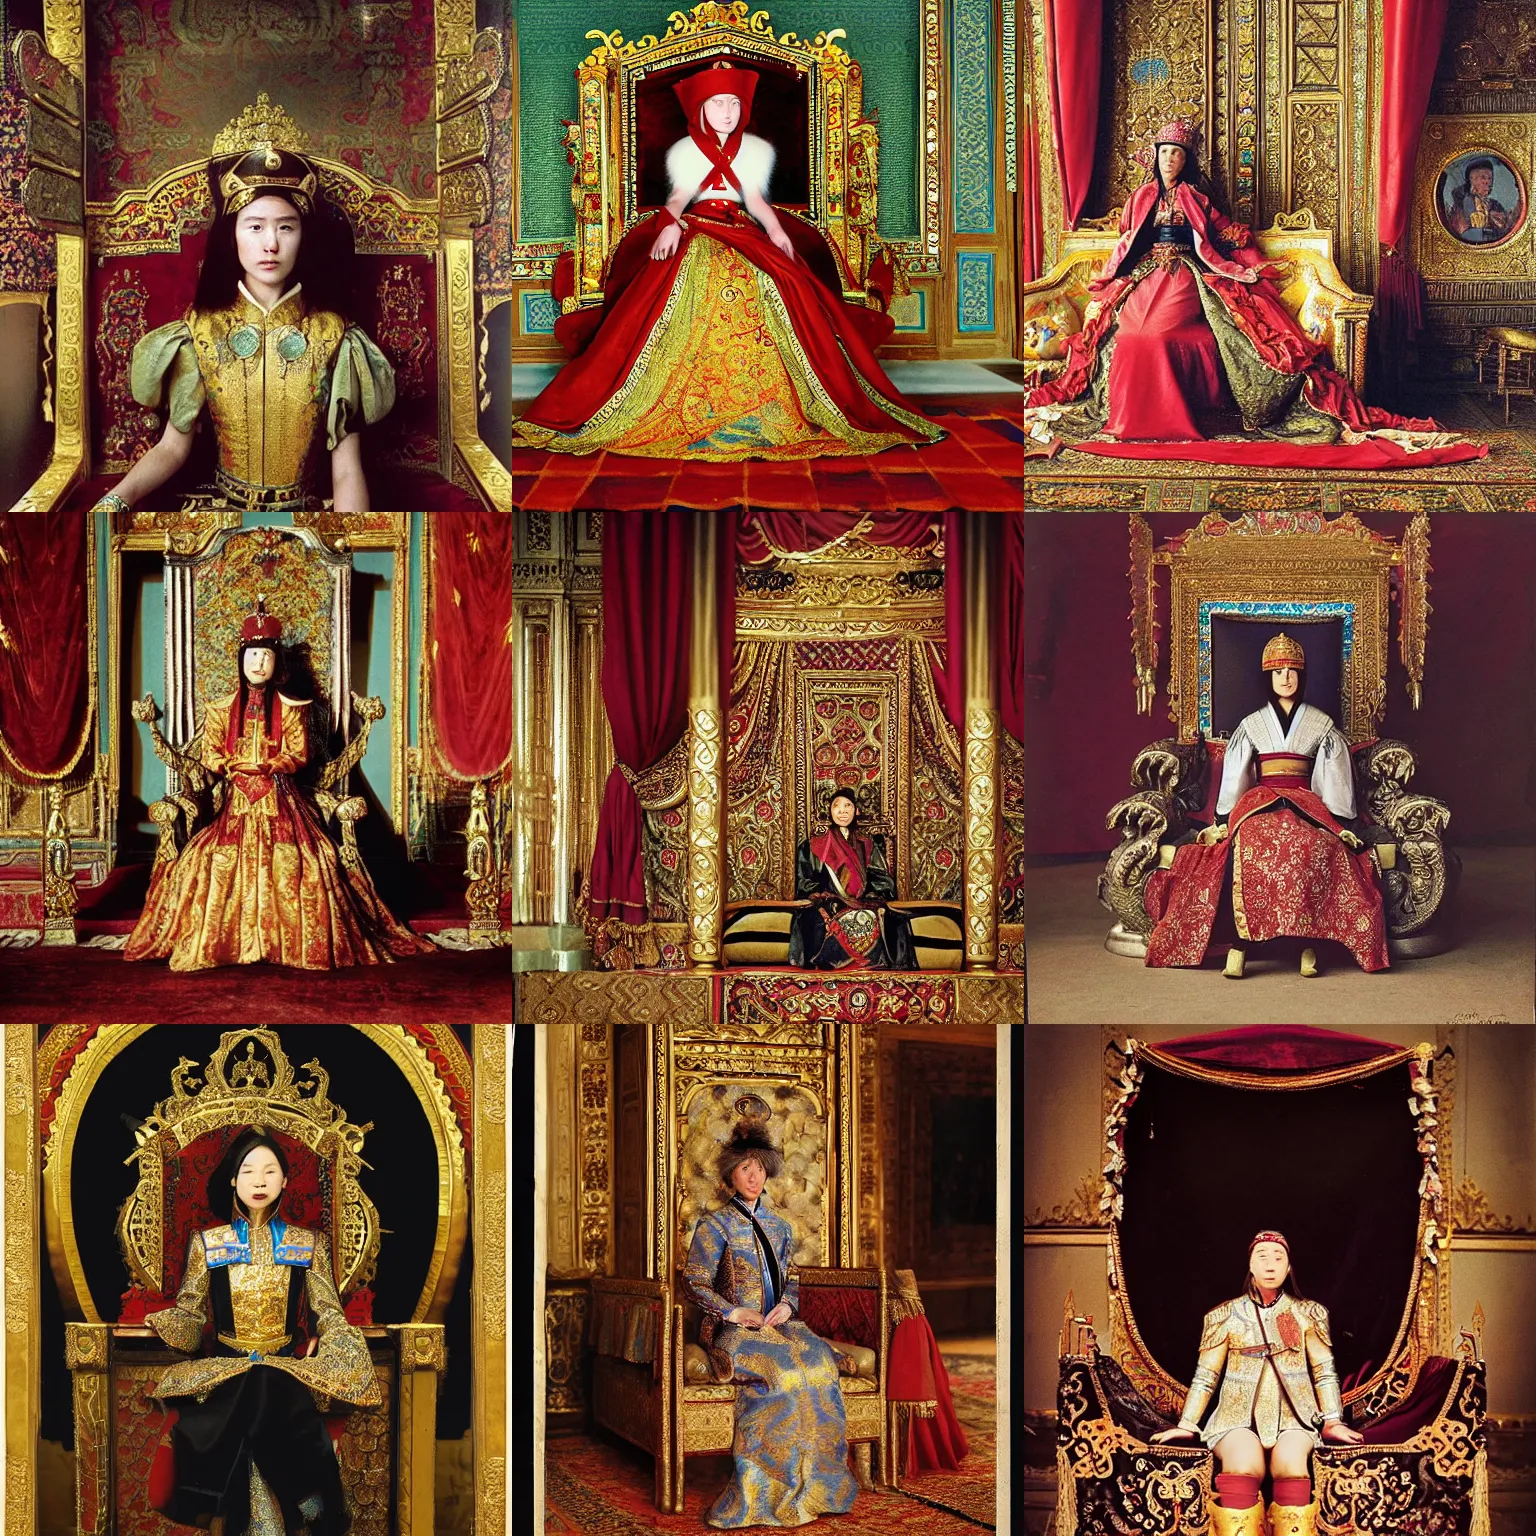 Prompt: A young woman as Genghis Khan, sitting on a throne, interior of Buckingham Palace, lavishly decorated, ornate, 1683, alternate history, photography by Annie Leibovitz